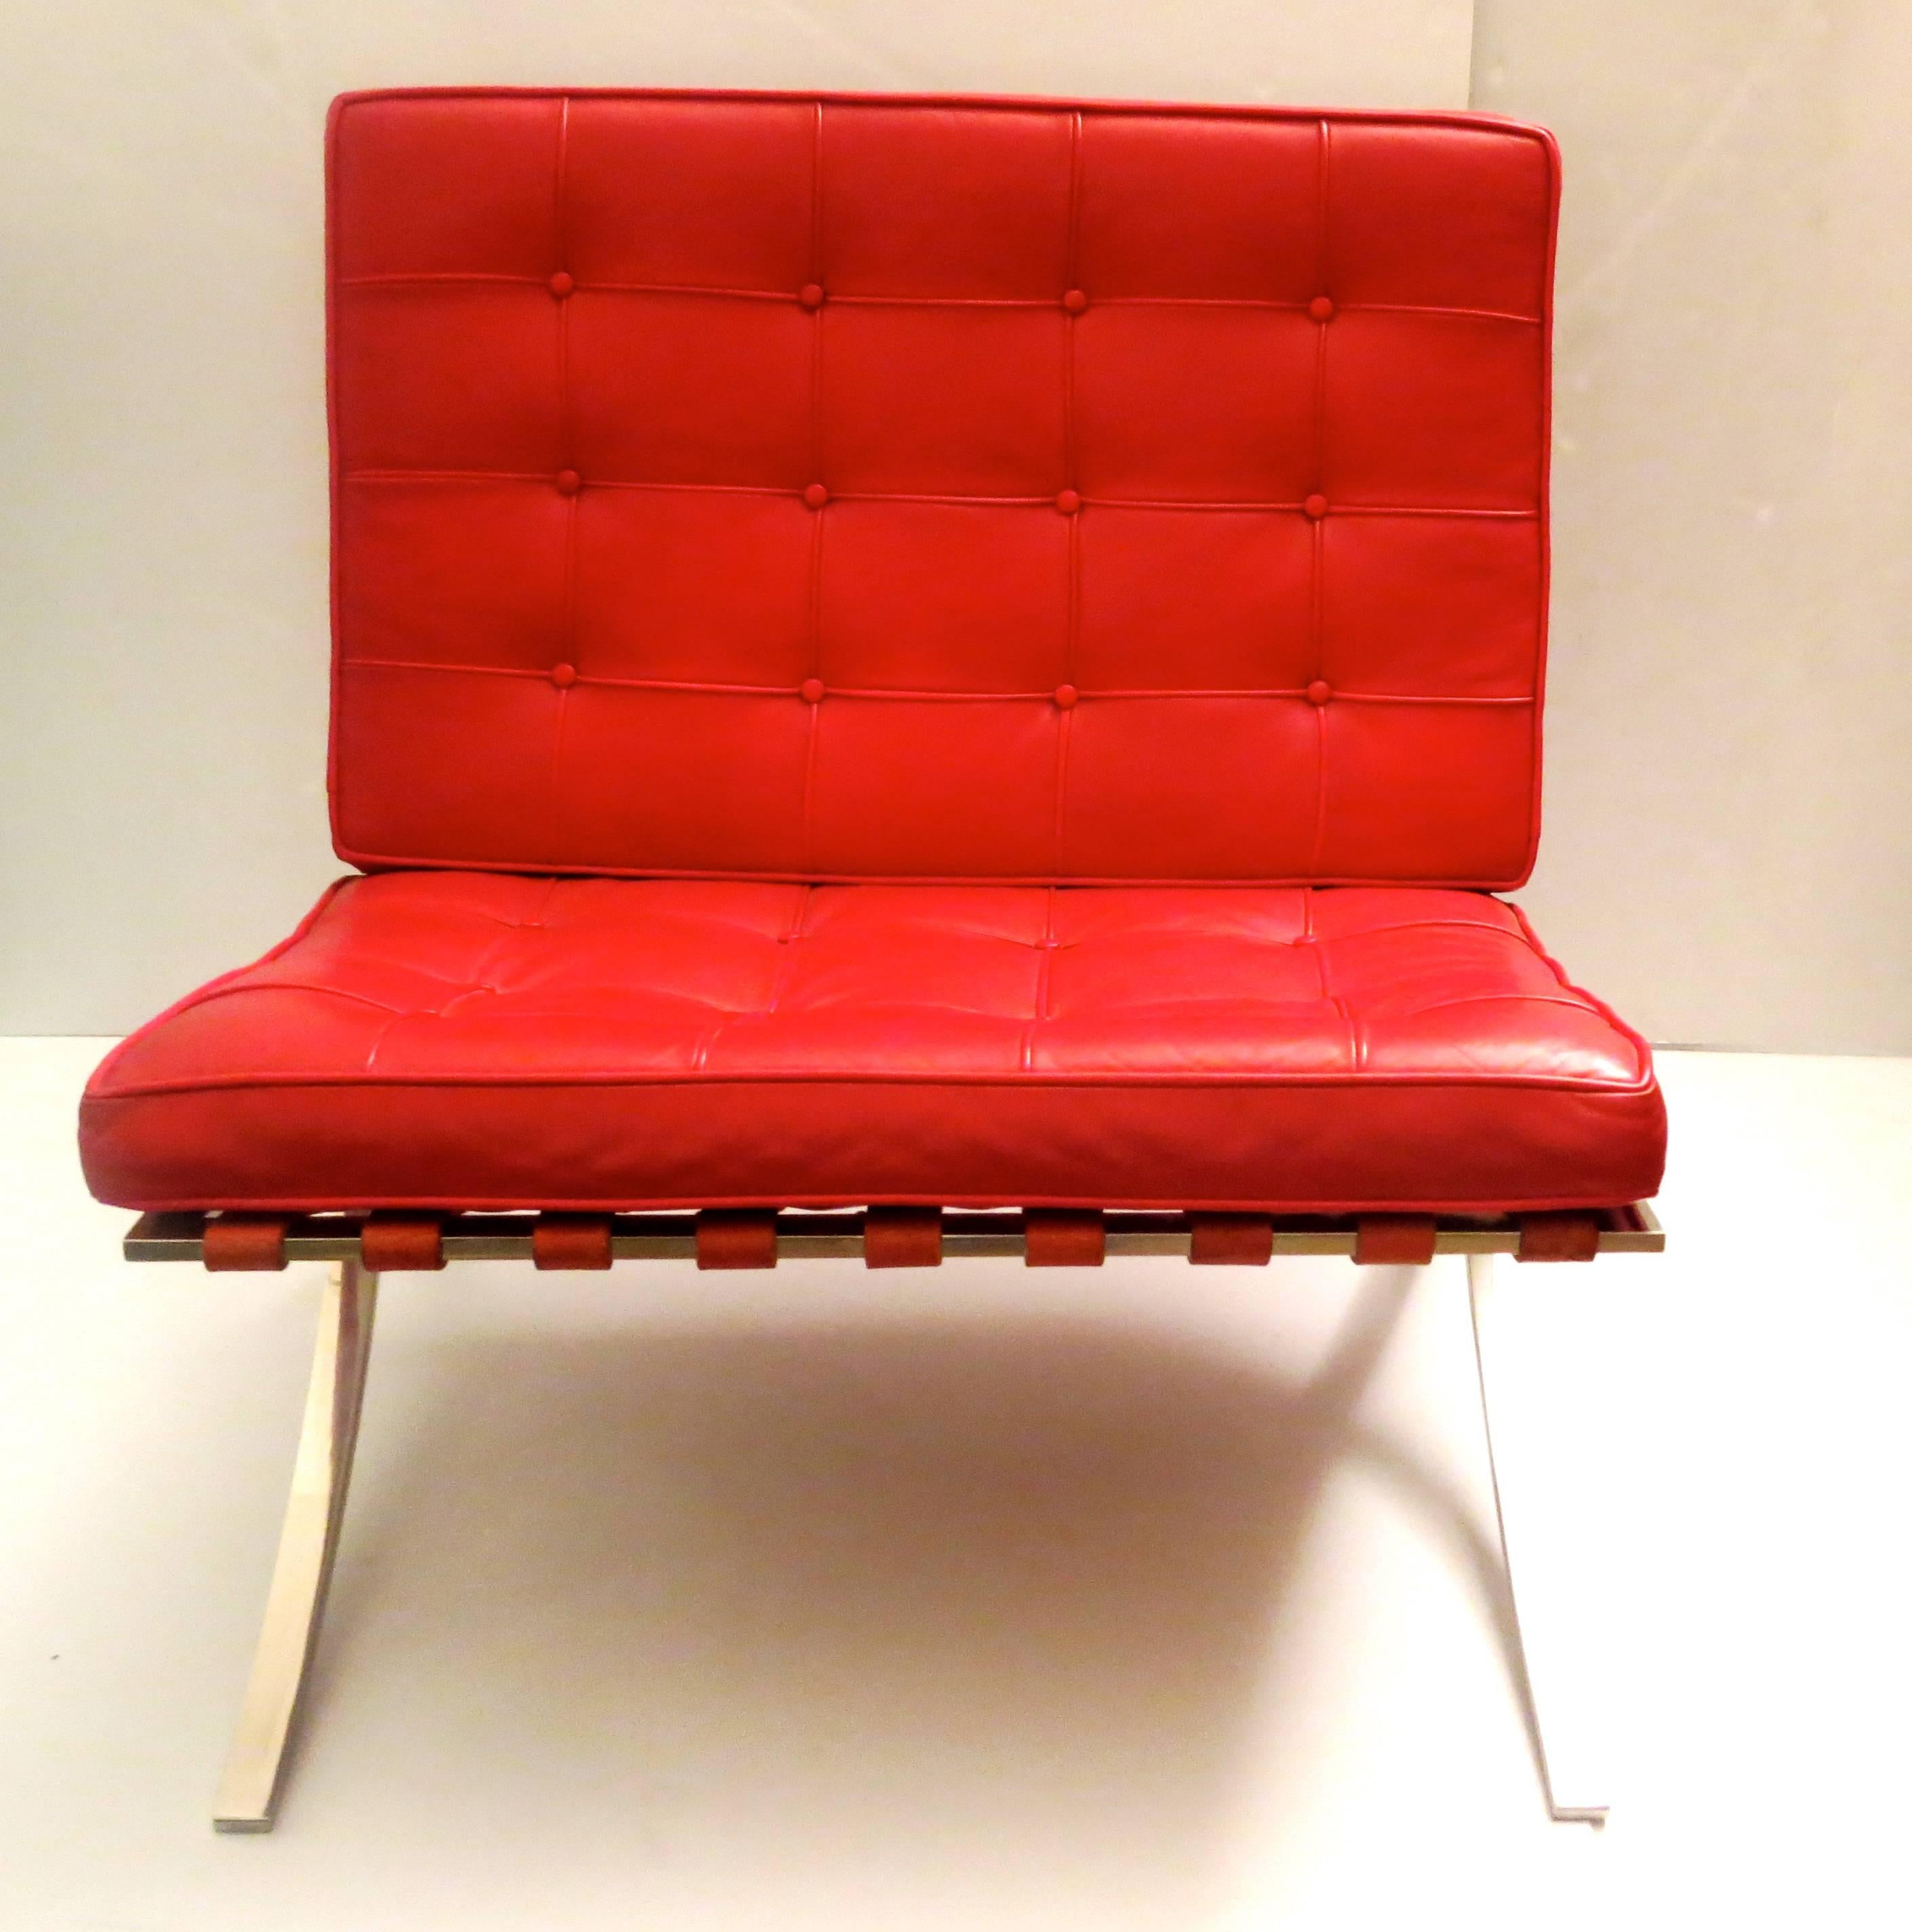 Hard to find pair of Barcelona red leather lounge chairs, design by Mies Van der Rodhe, early production in red leather and polished stainless steel frame, very nice and clean condition, all original some worn and normal wear due to age overall very